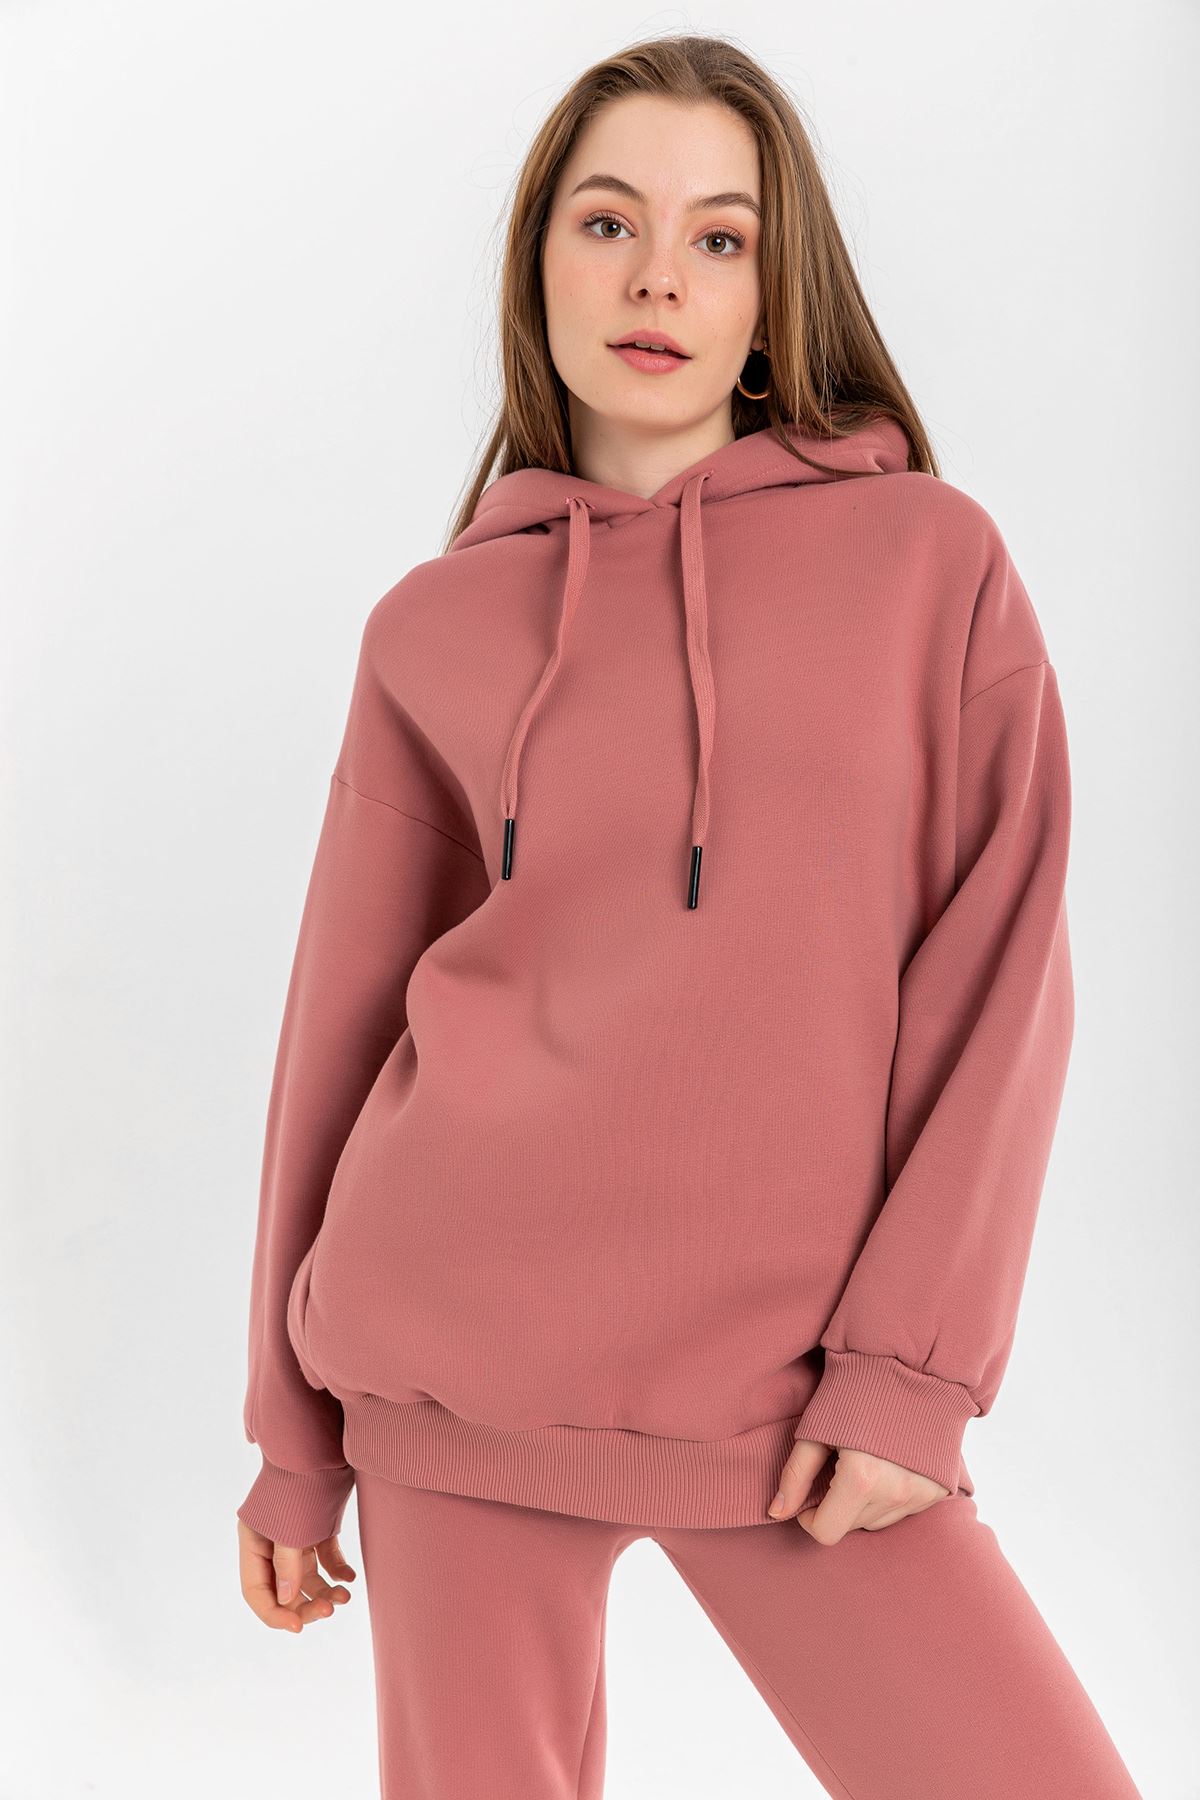 Third Knit With Wool İnside Fabric Hooded Hip Height Oversize Women Sweatshirt - Rose 